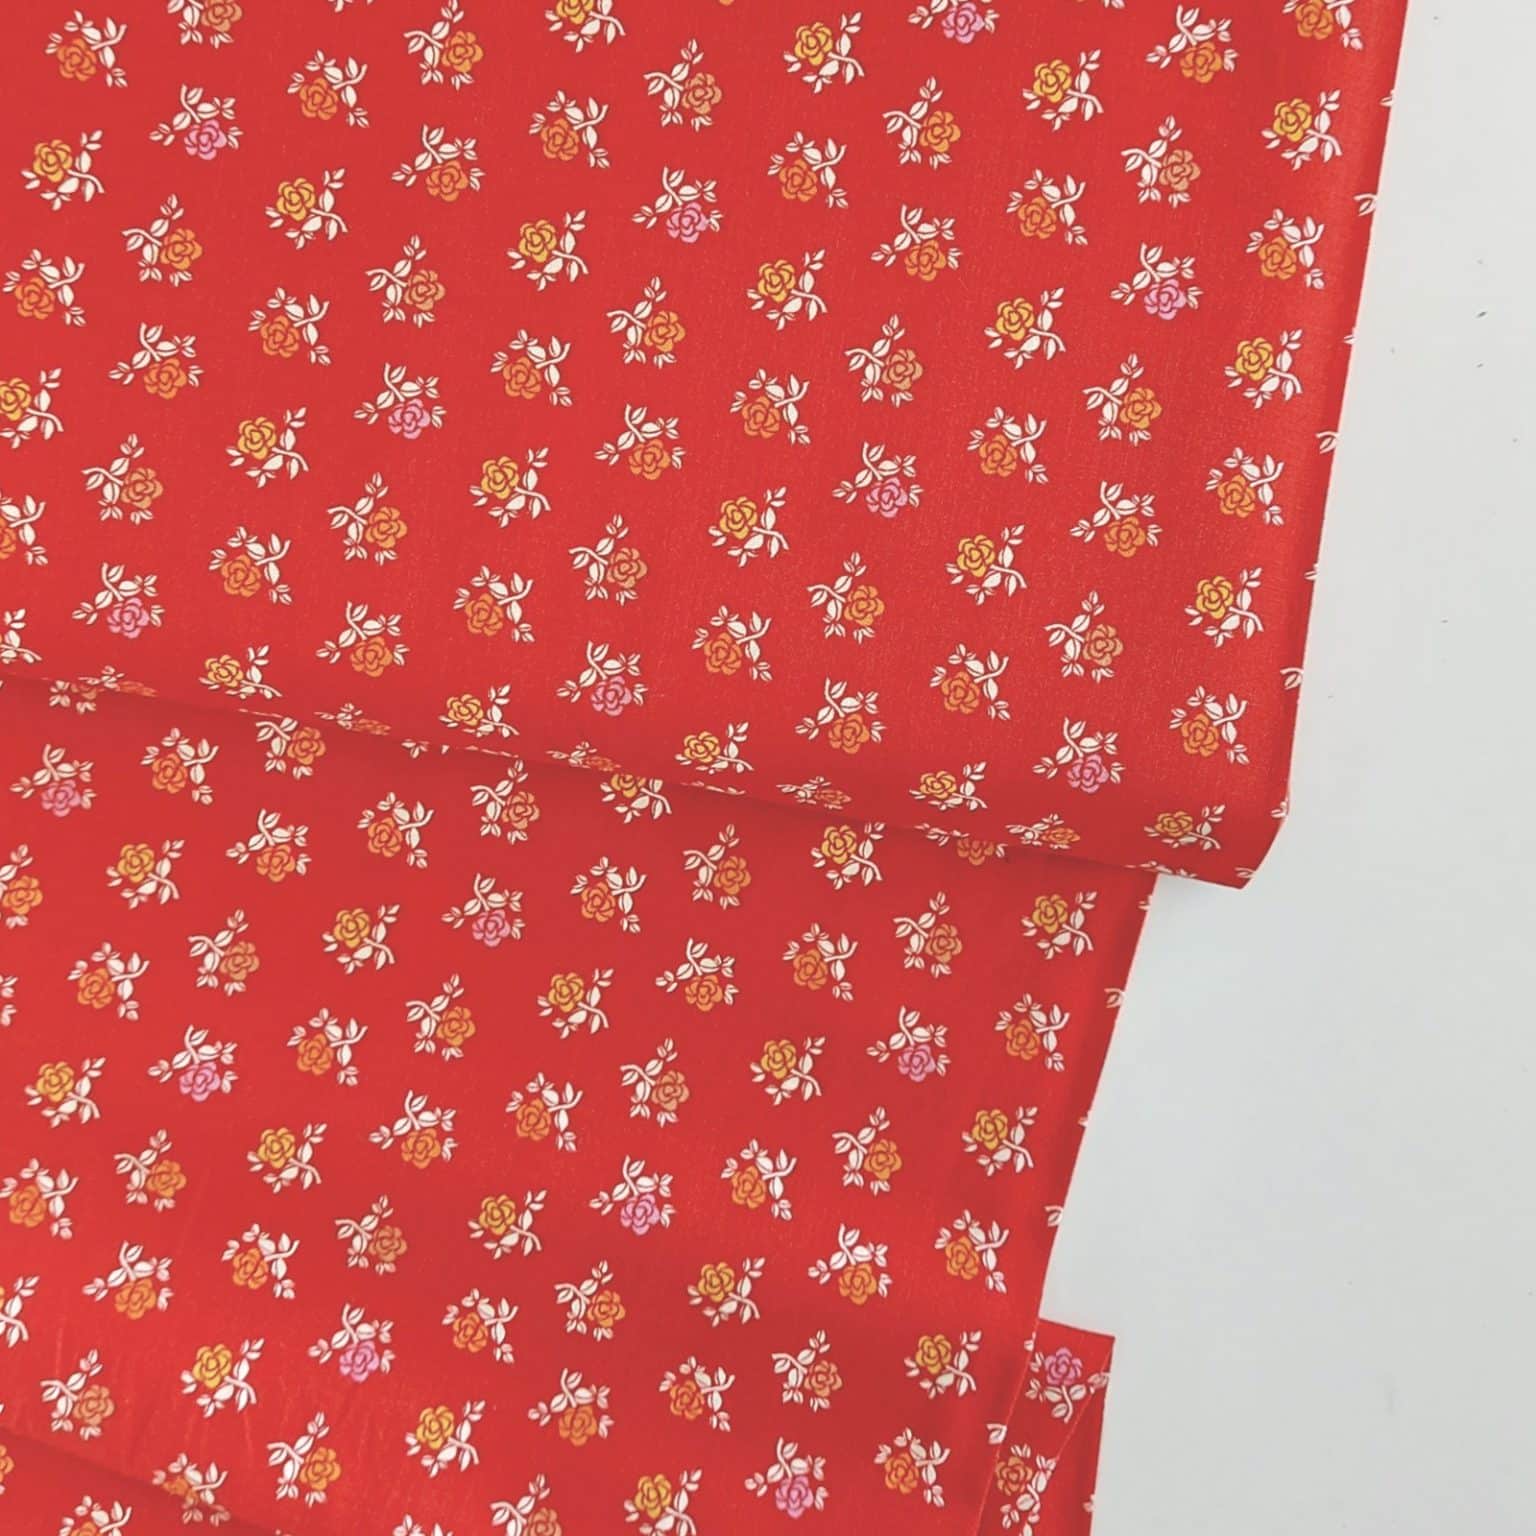 Intrigue Floral On Red Cotton Fabric | More Sewing